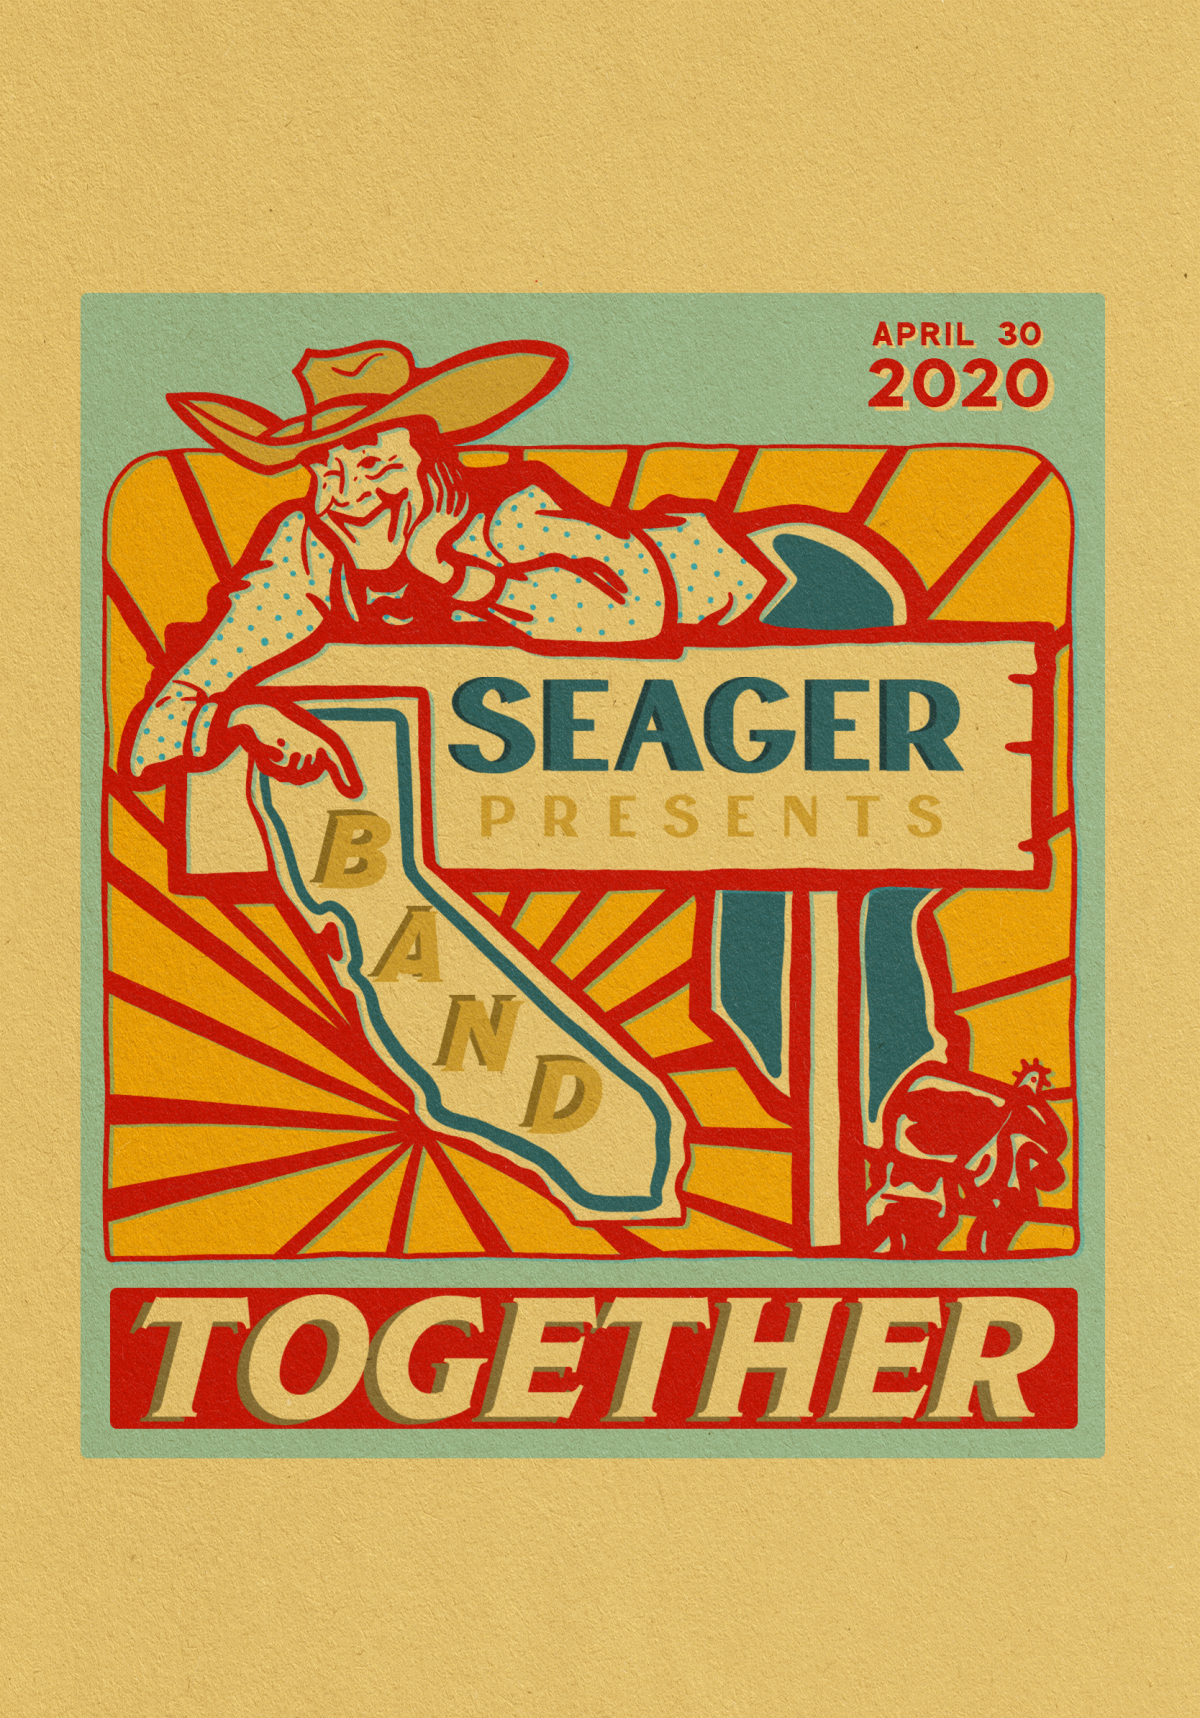 A promotional flyer for "Band Toegther," presented by Seager on April 30